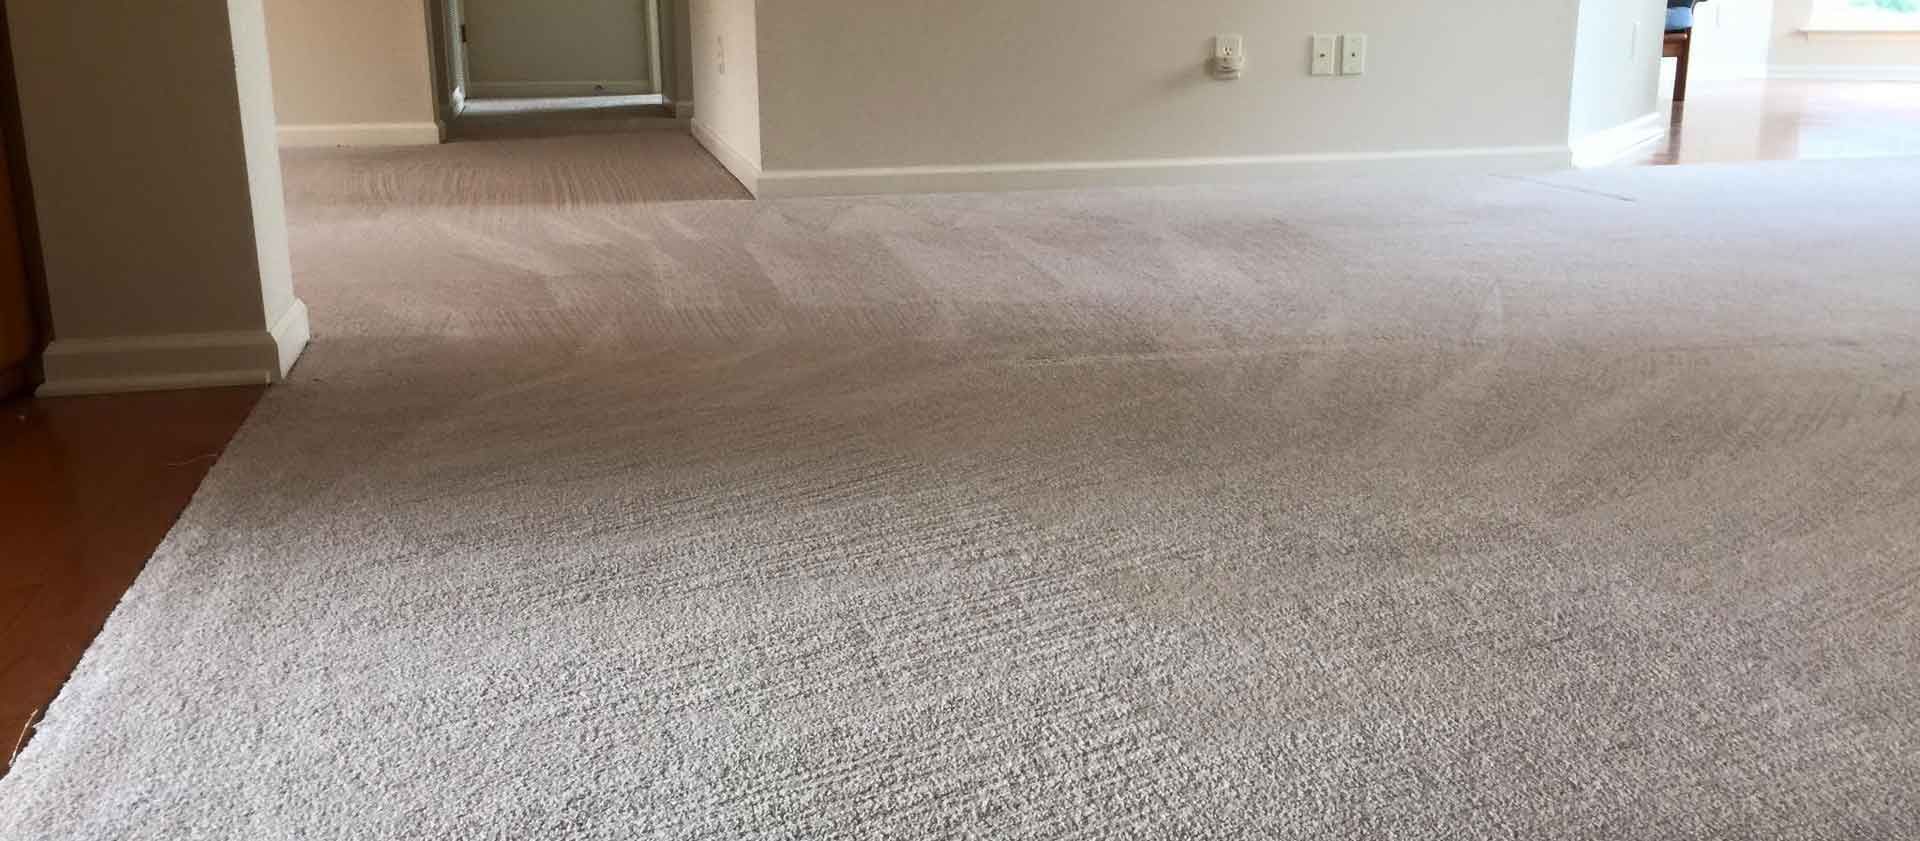 Commercial Carpet Cleaning in Powell, TN